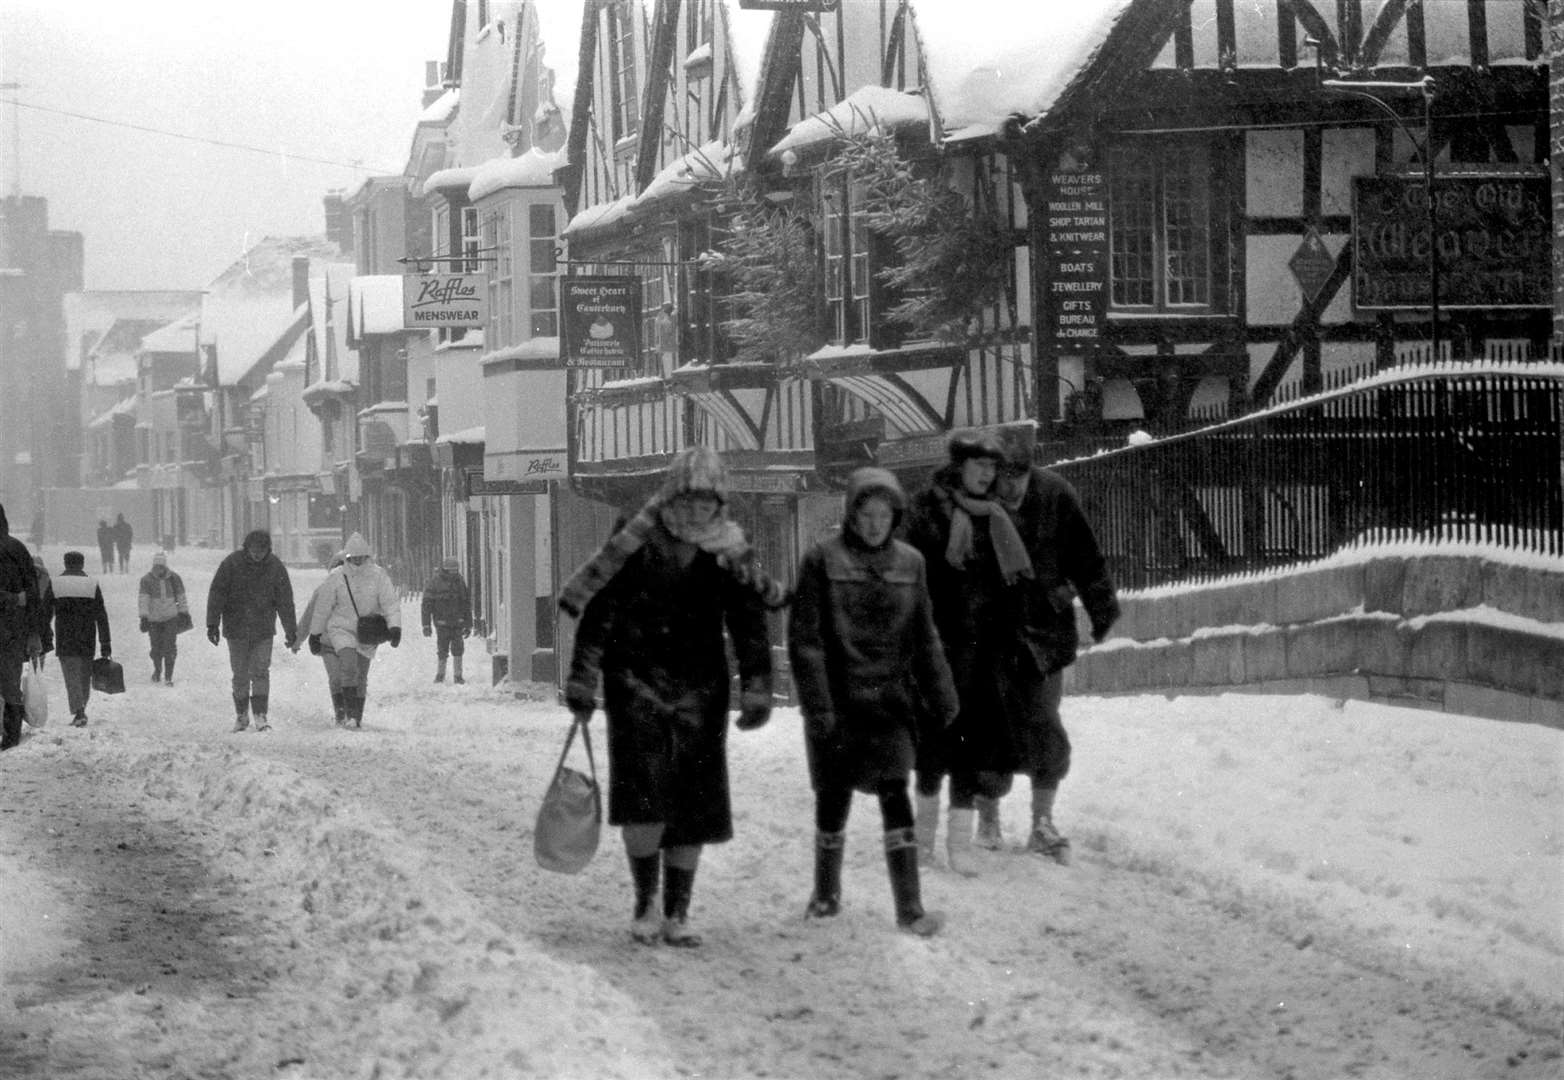 People making their way along Canterbury high street in the January blizzard